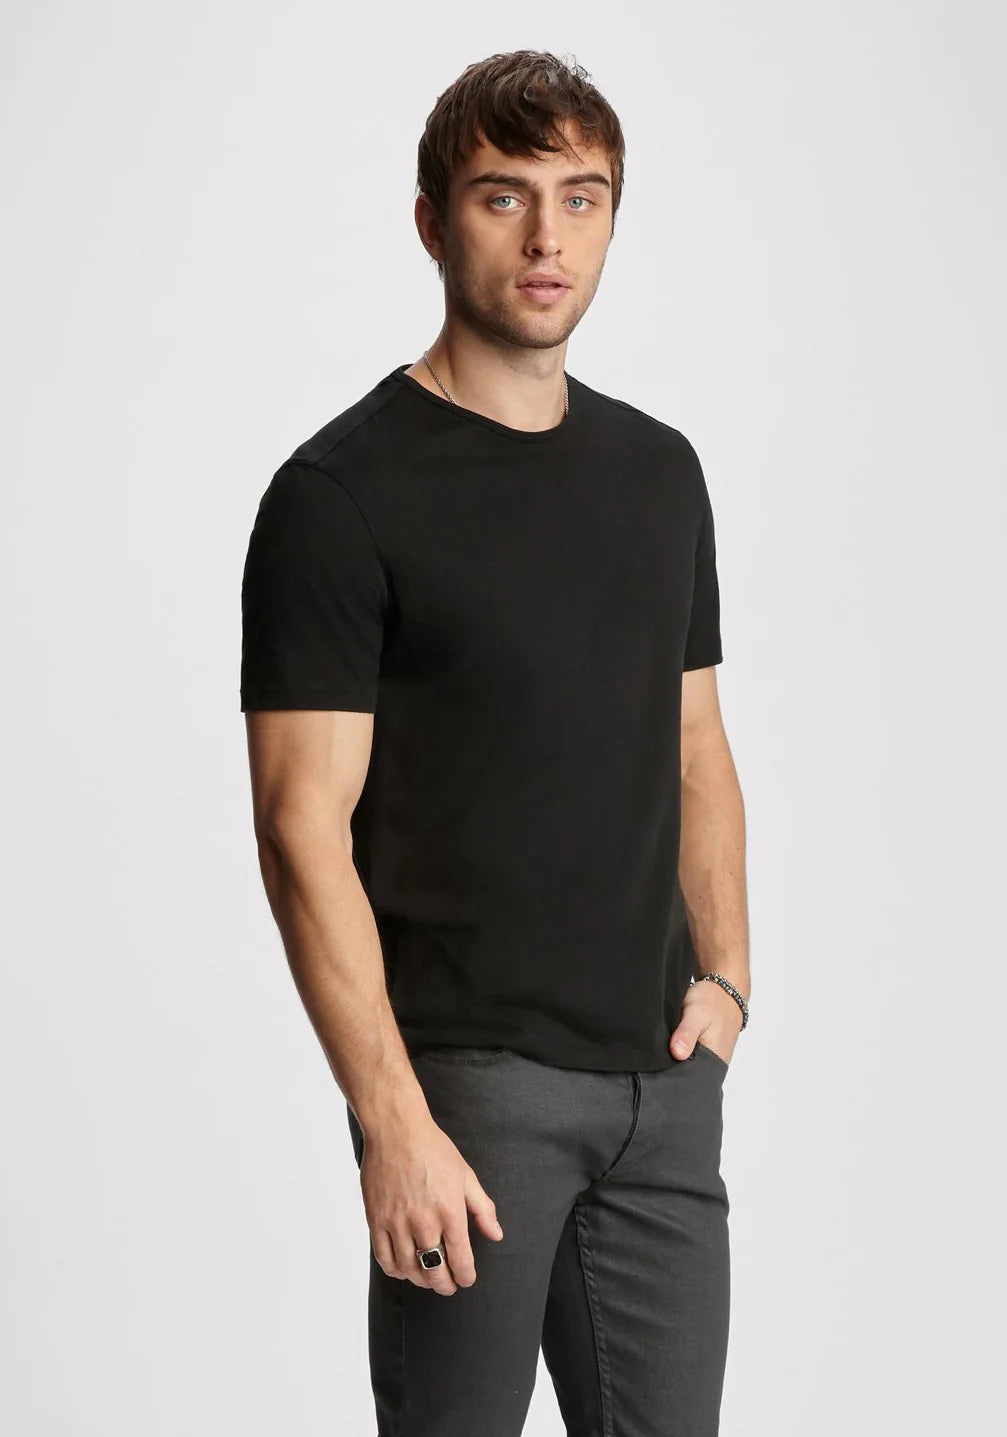 John Varvatos Collection crafts this tee from premium pima cotton in a textured slub knit, with results well beyond basic.